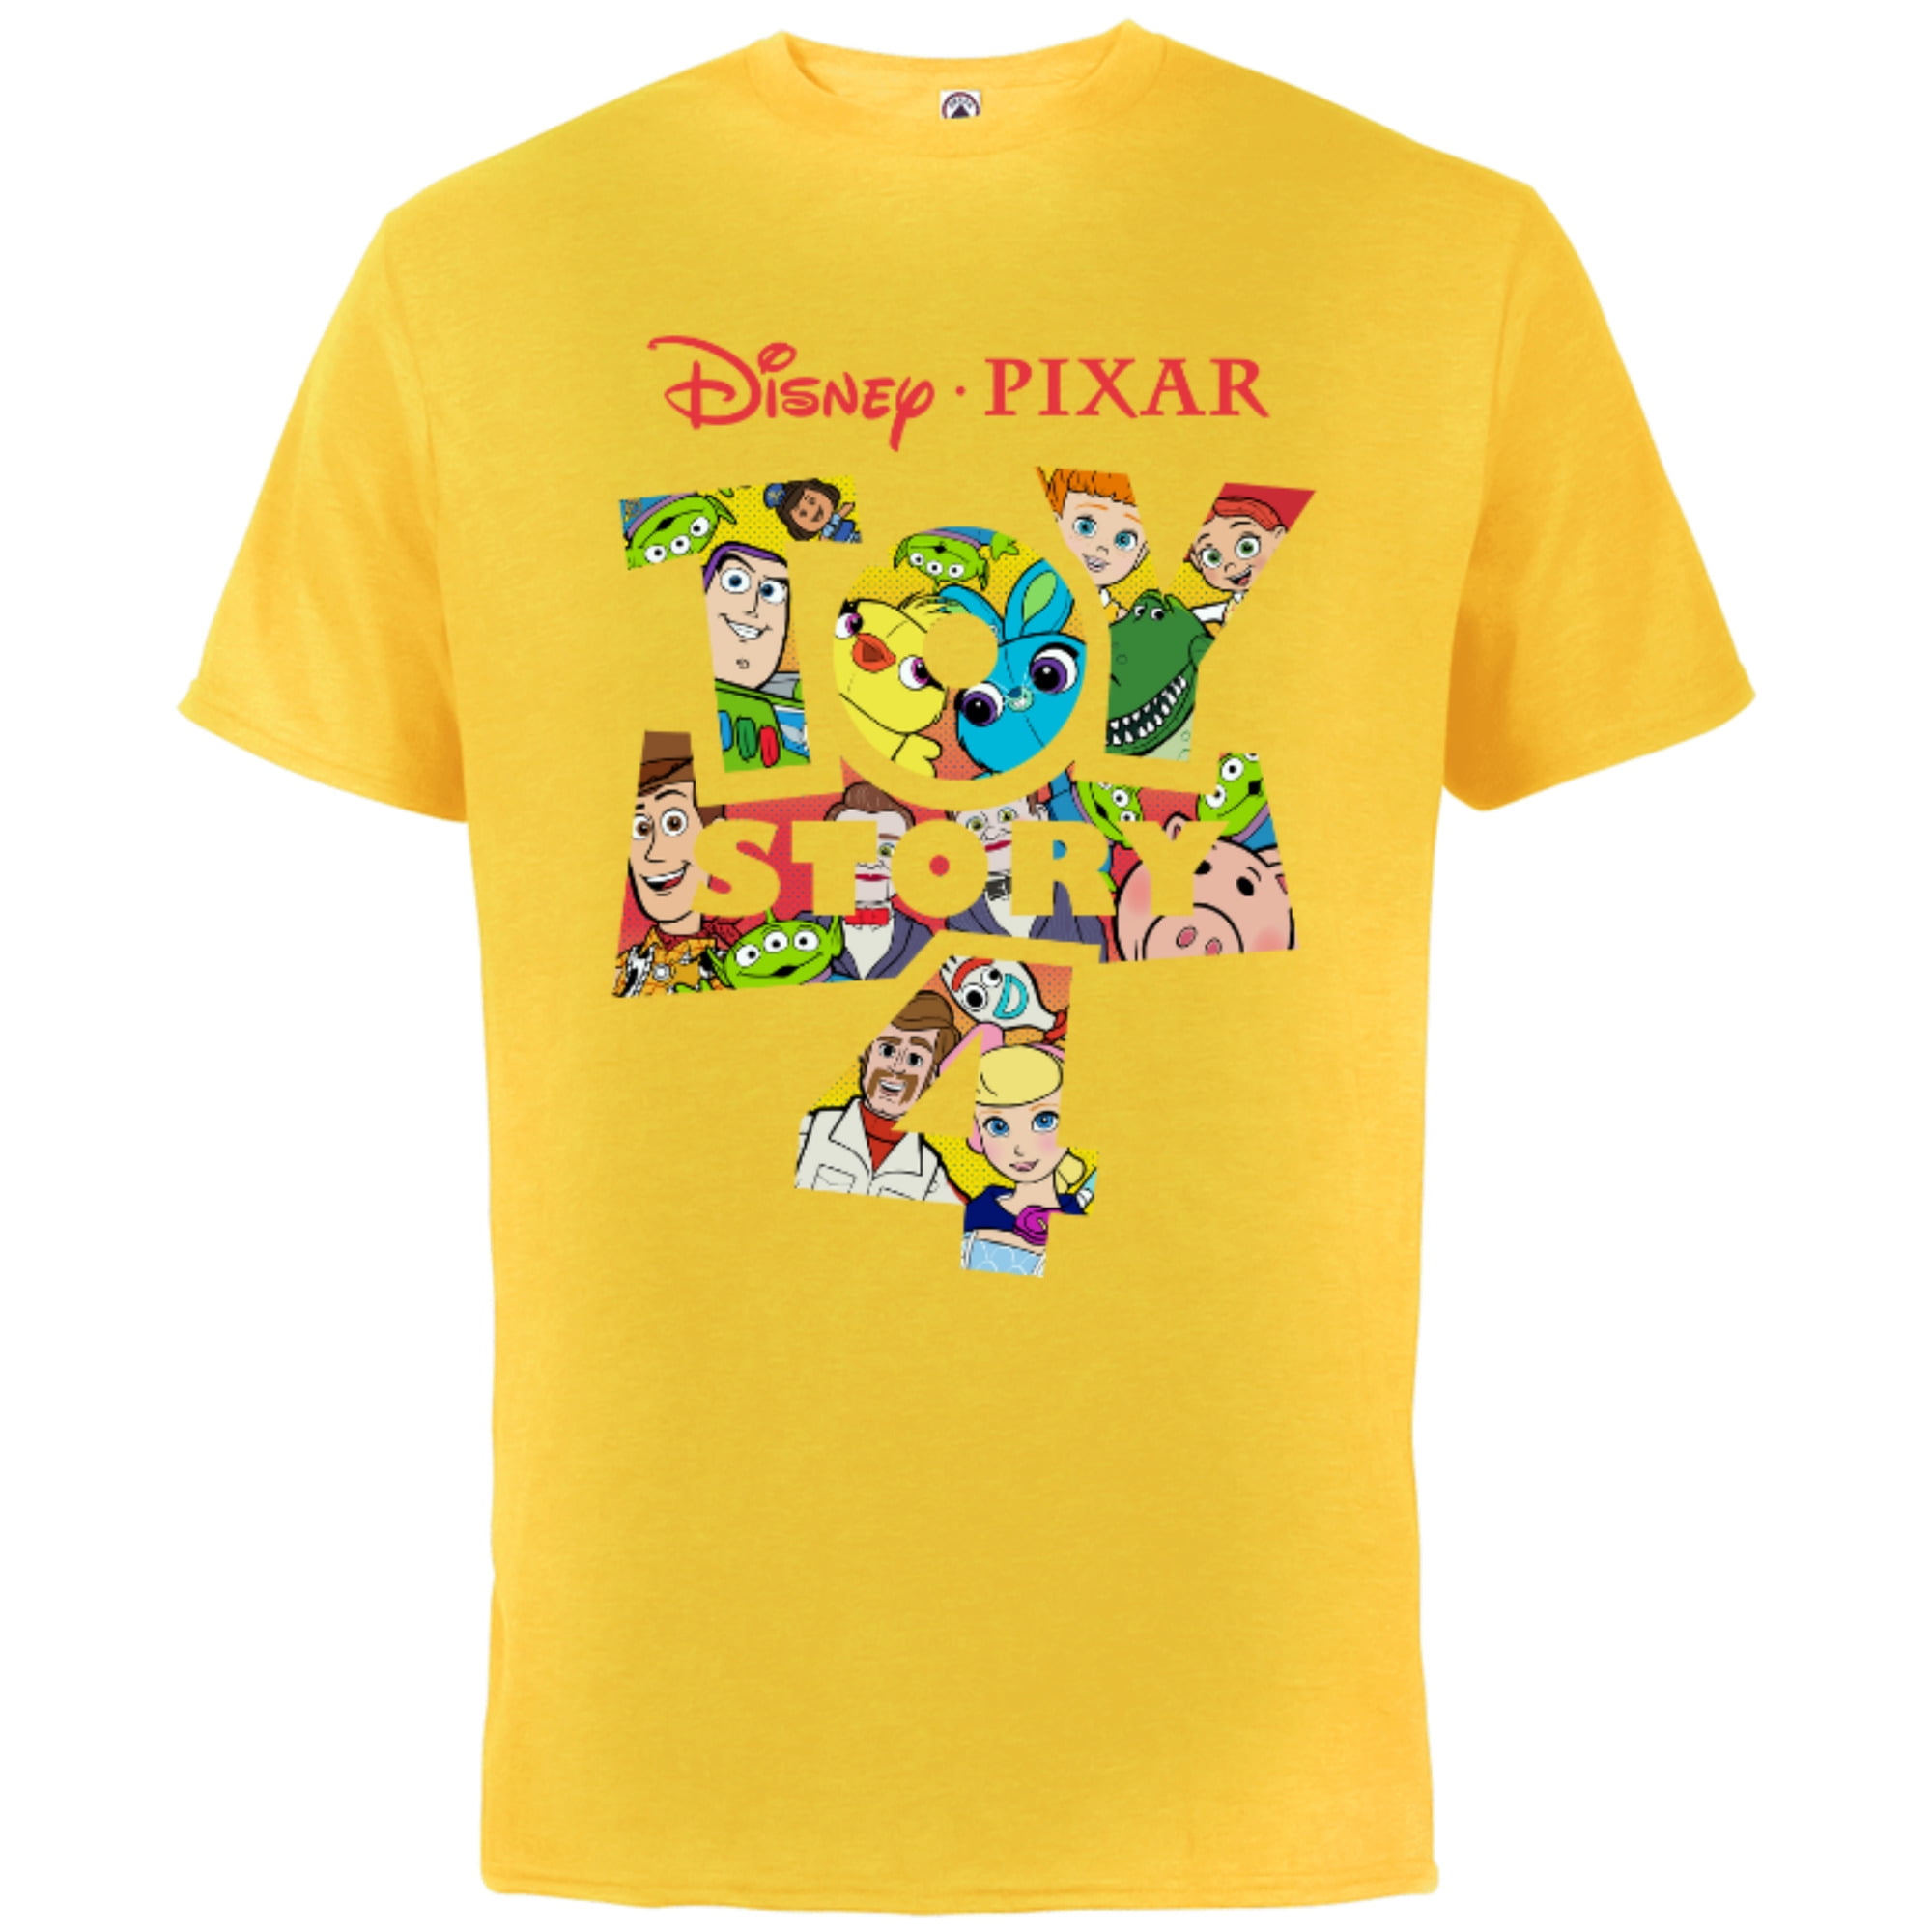 Sleeve Adults - T Logo Customized-White Pixar 4 Characters and T-Shirt Toy -Shirt Cotton Disney for - Short Story